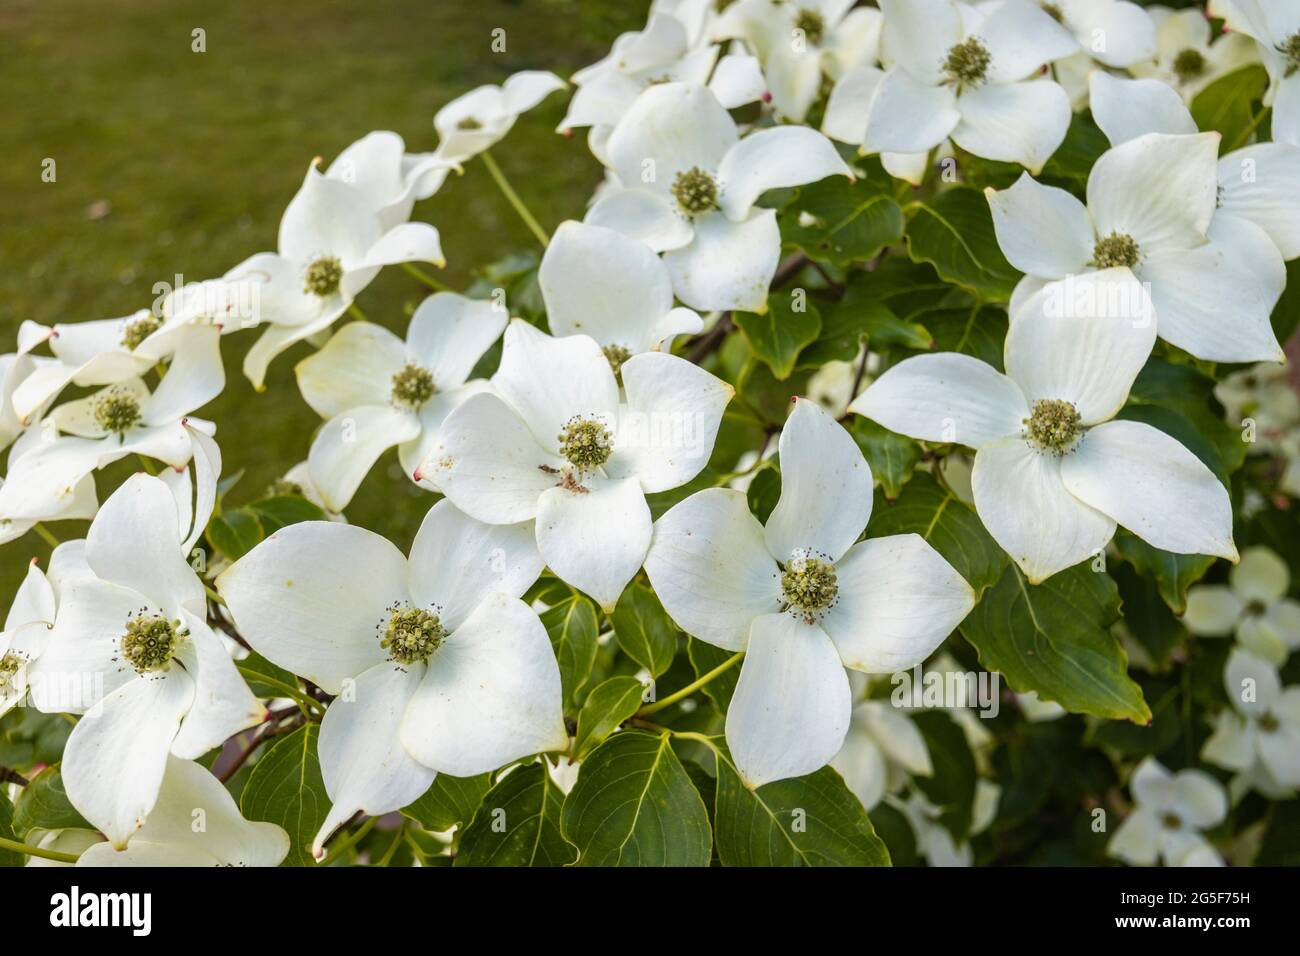 White to cream bracts of cornus kousa var chinensis 'China Girl', a flowering Chinese dogwood tree, an ornamental plant growing in a Surrey garden Stock Photo